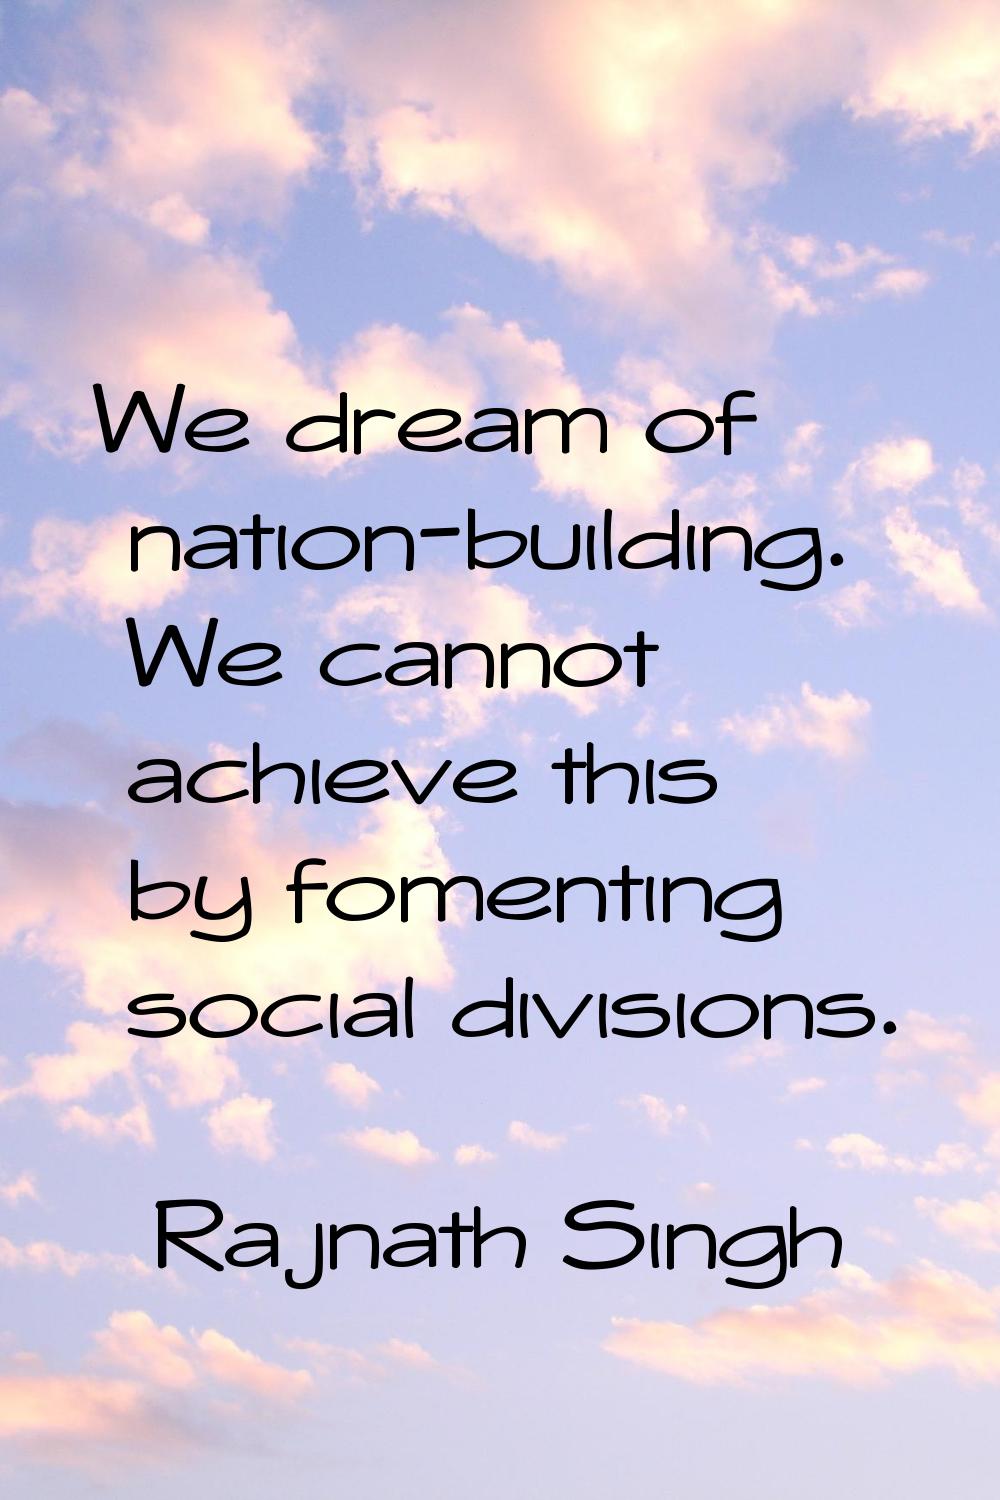 We dream of nation-building. We cannot achieve this by fomenting social divisions.